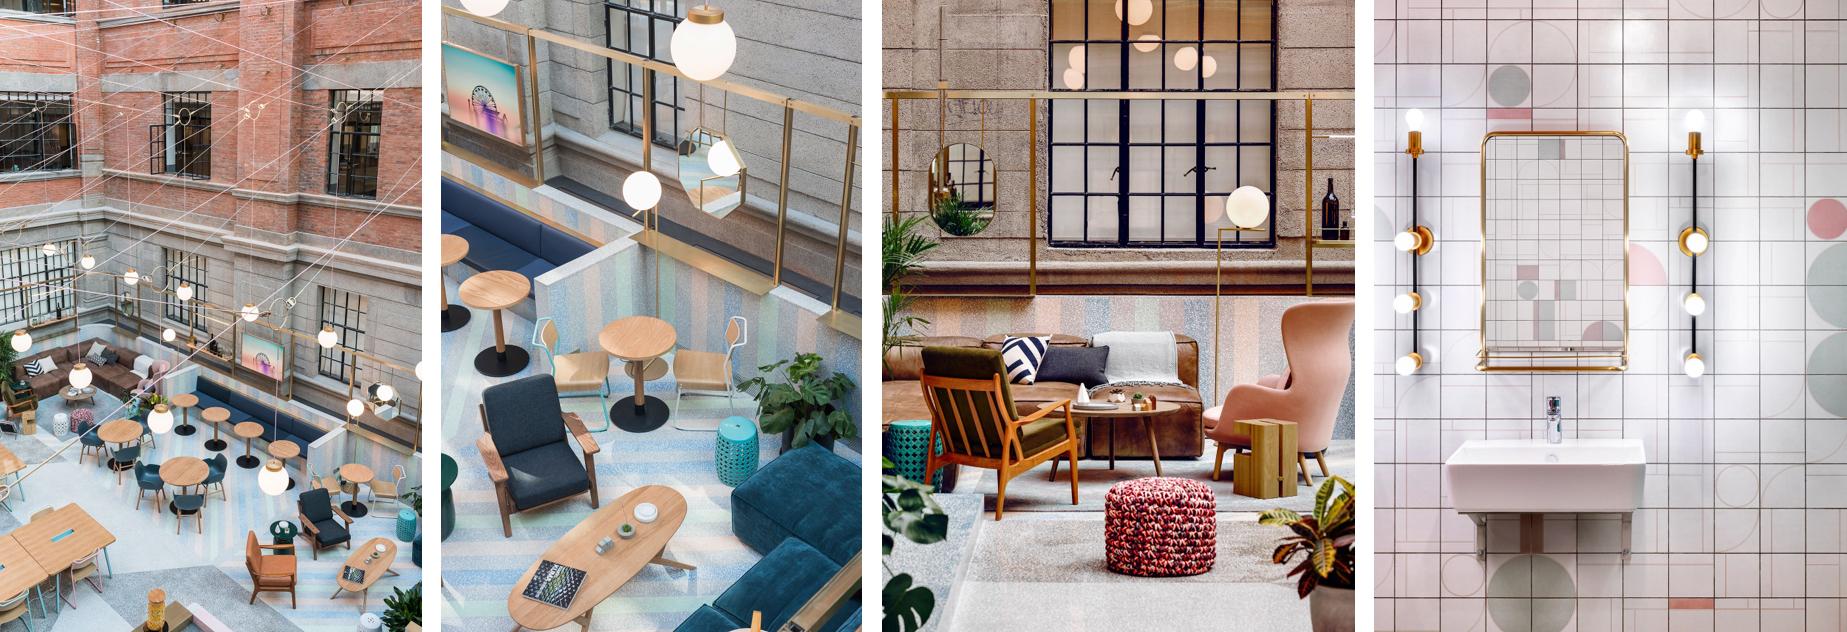 A closer look inside the WeWork flagship in Shanghai